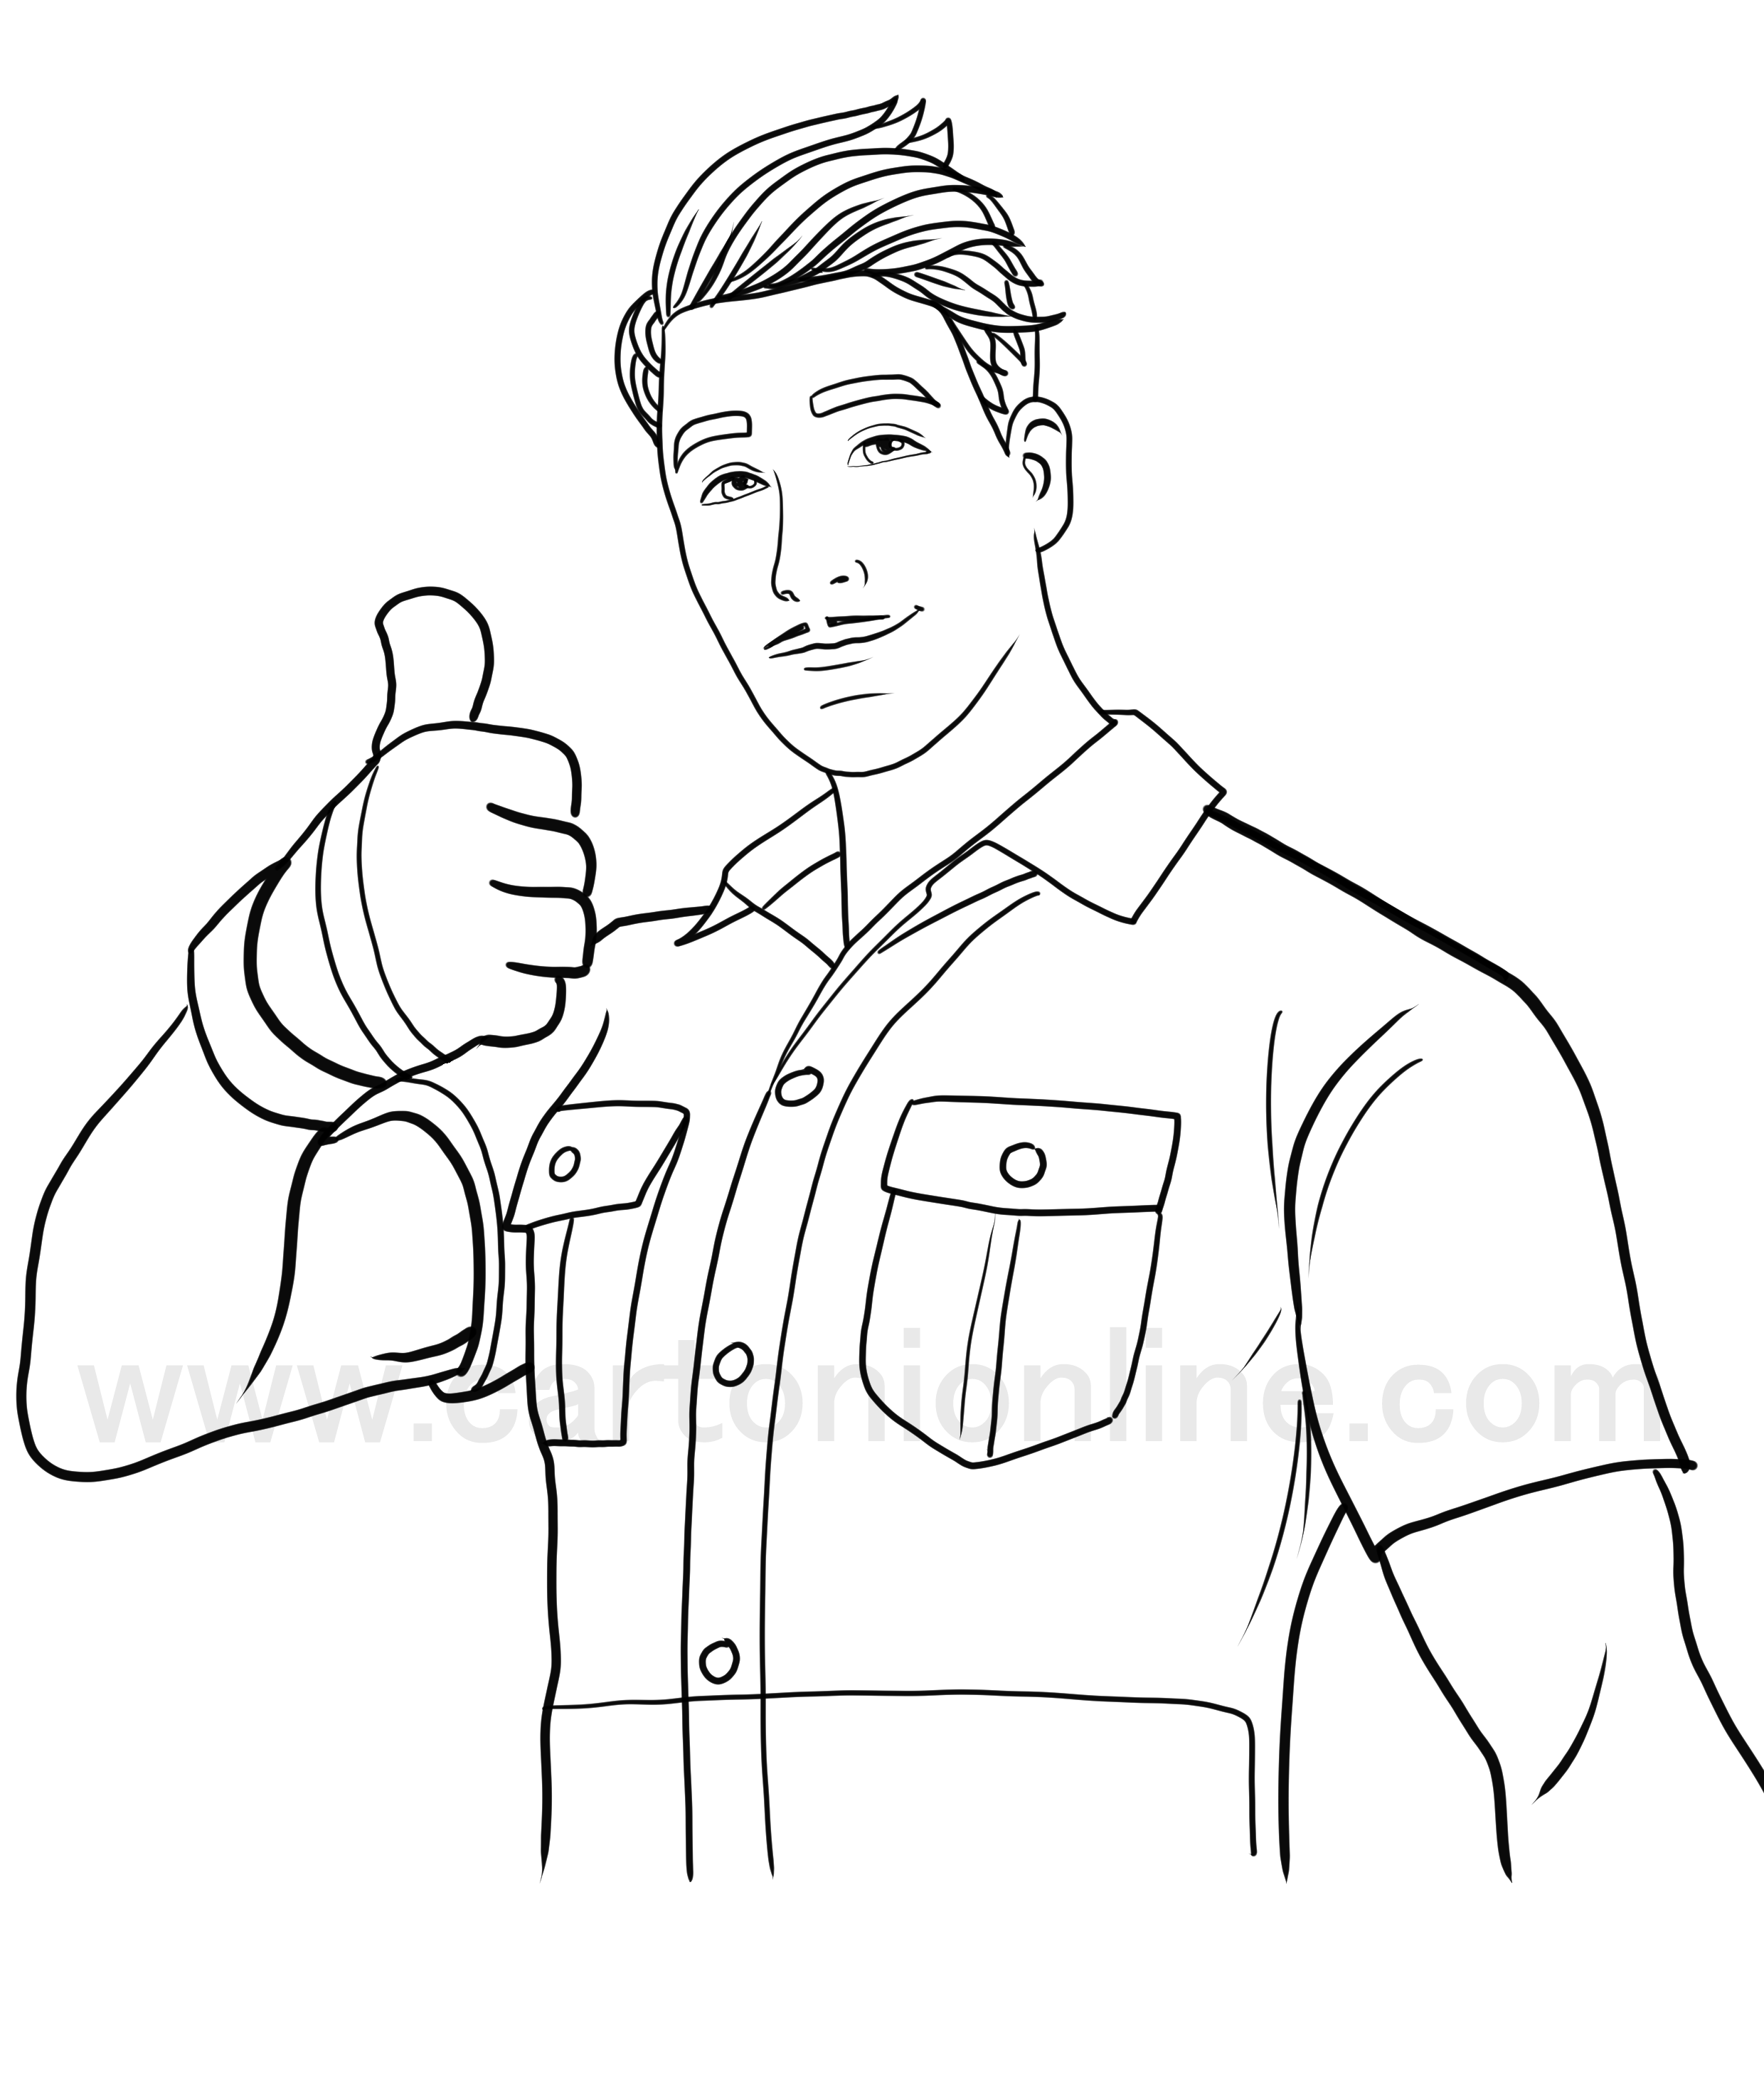 Lazarbeam from Fortnite coloring pages to print and coloring